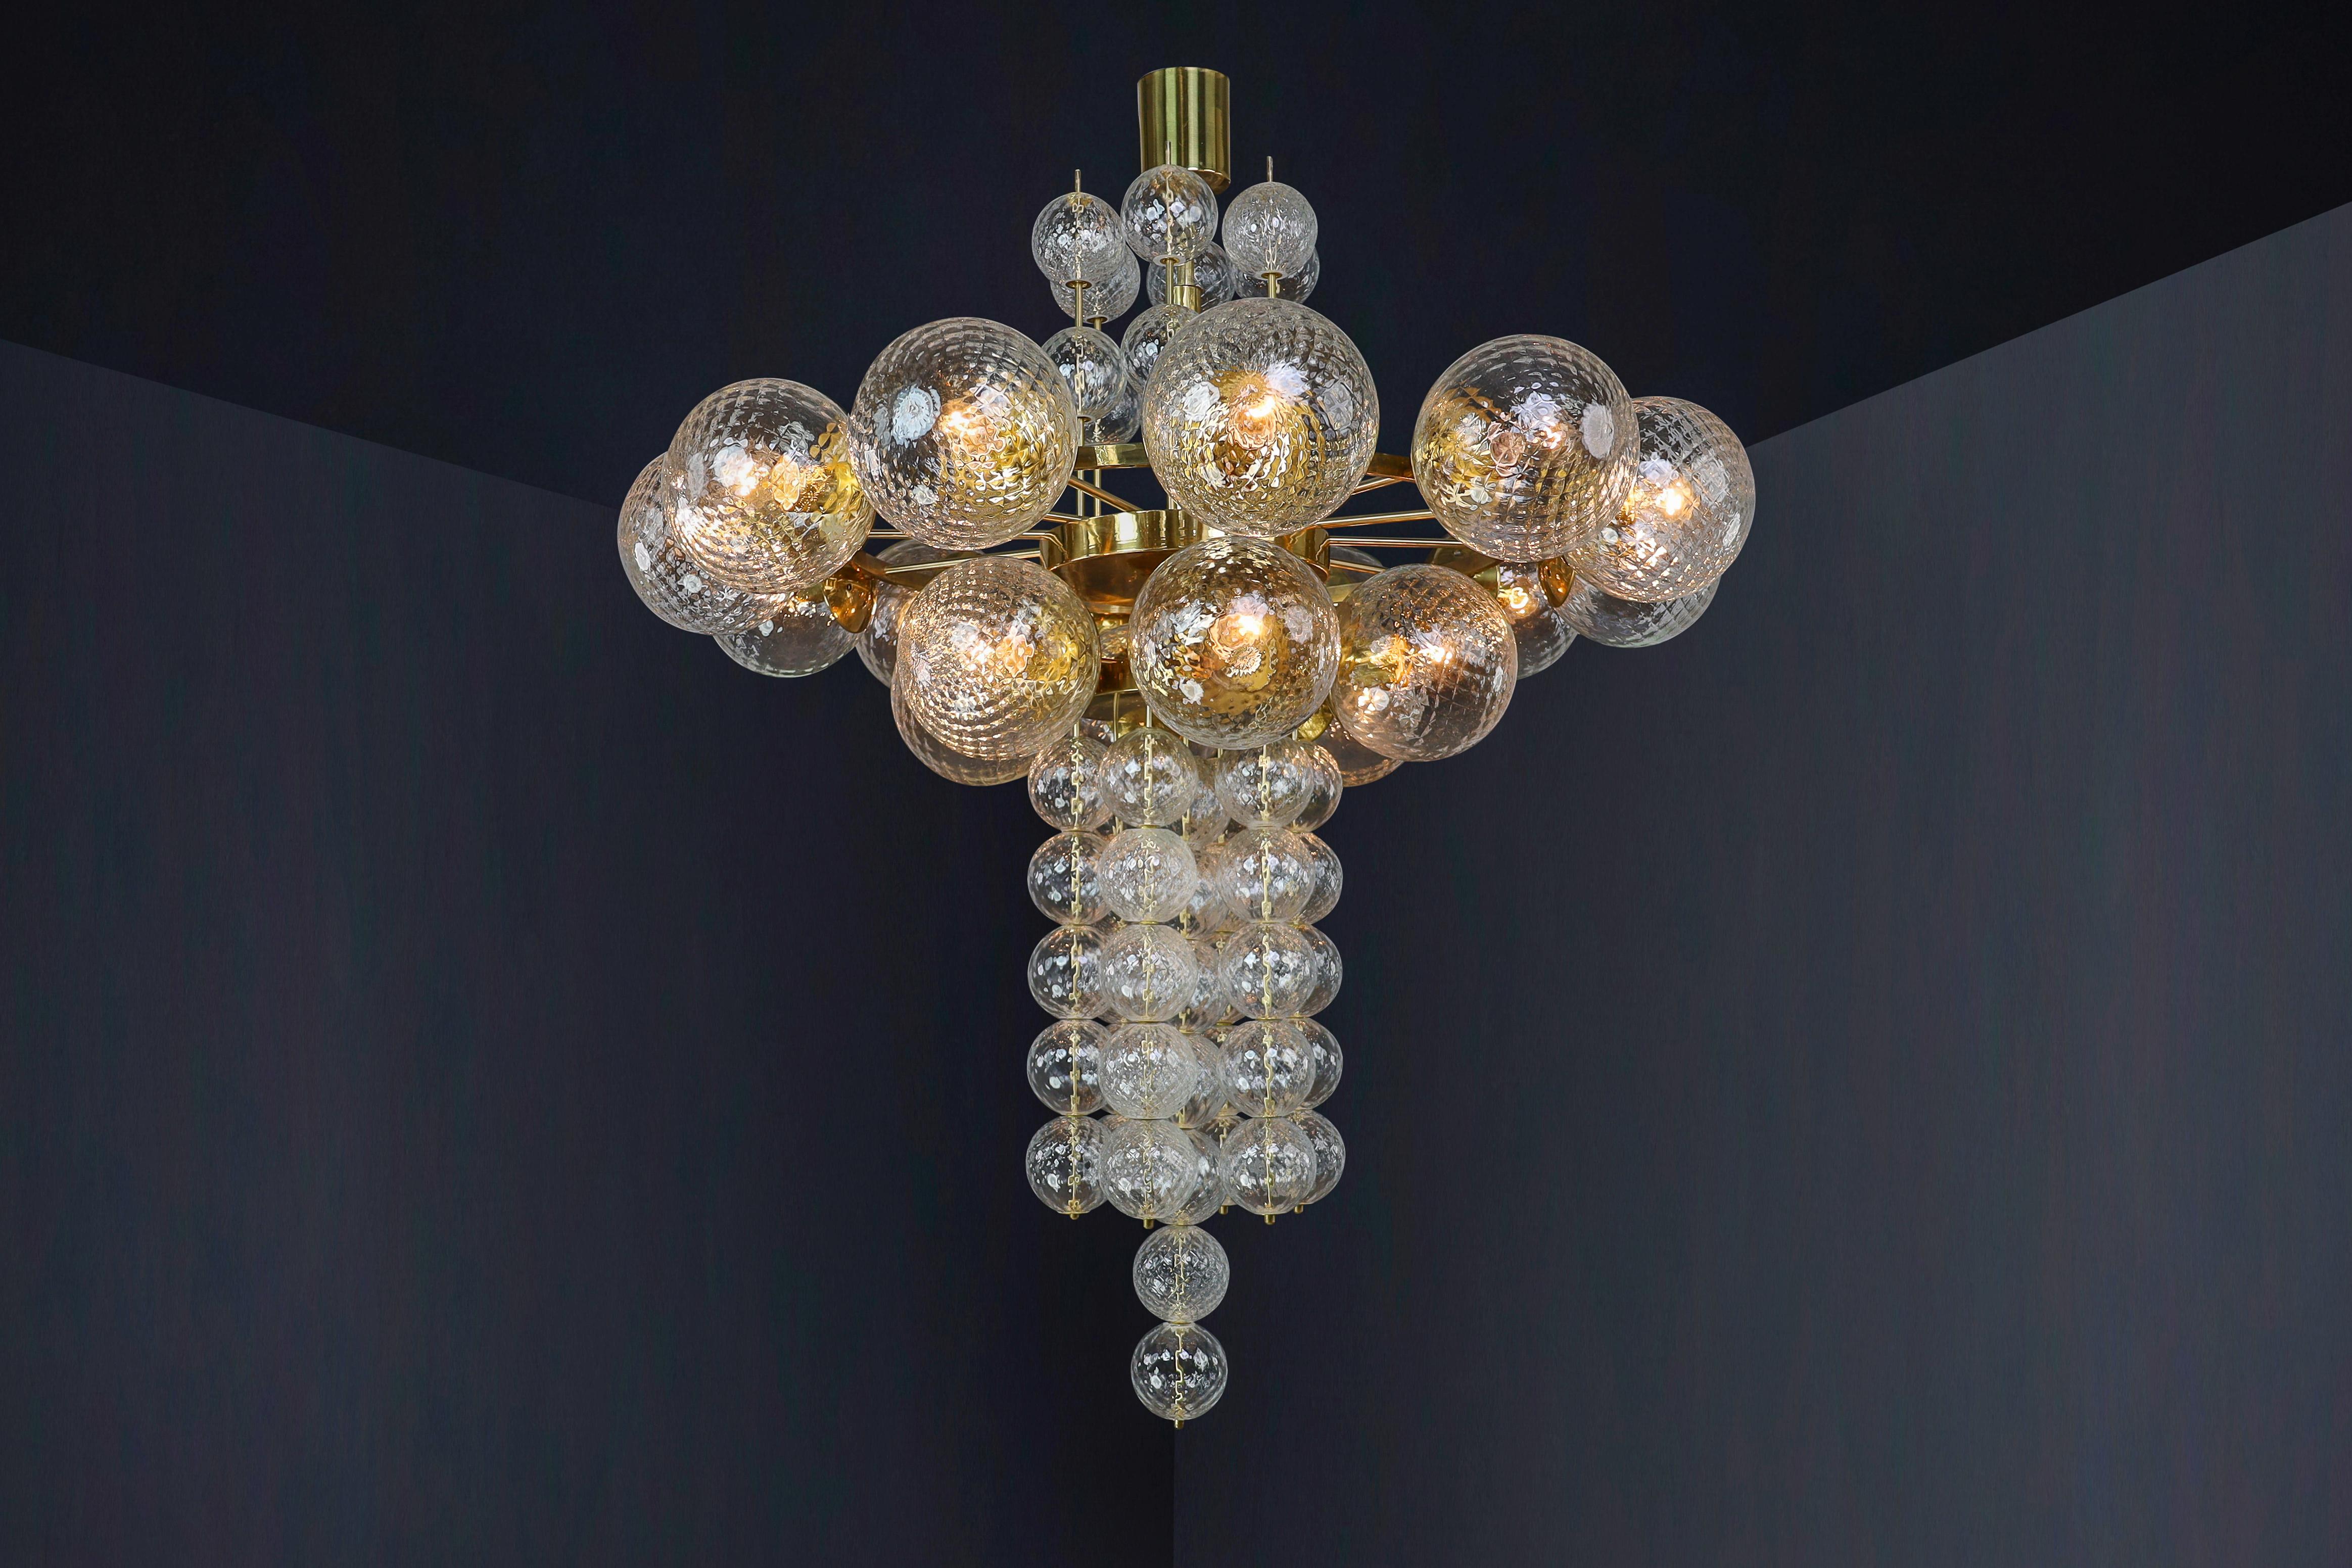 Large Chandelier with brass fixture and hand-blowed glass globes by Preciosa Cz. For Sale 6